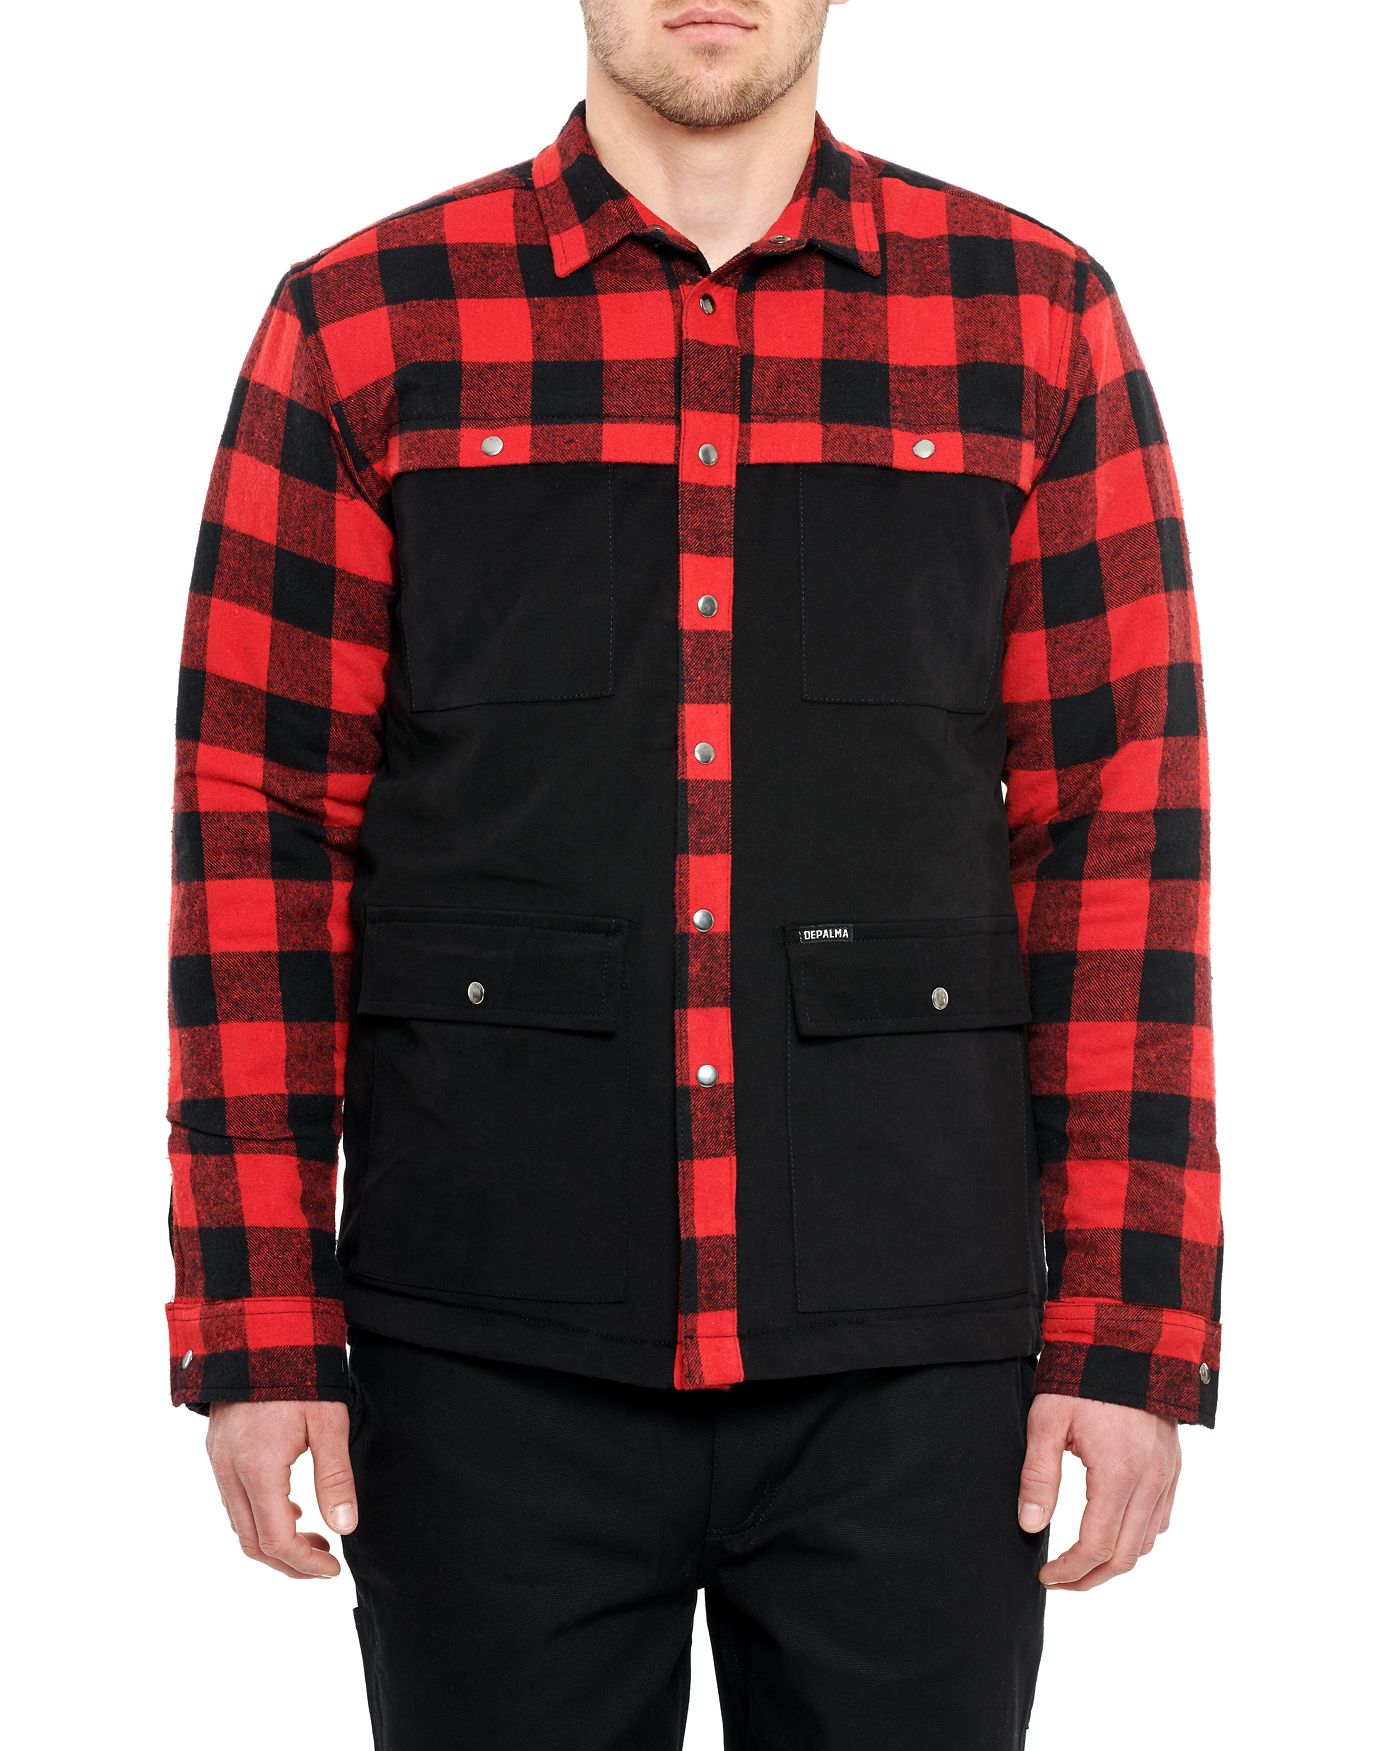 Photo of Duty L/S Padded Shirt, Red